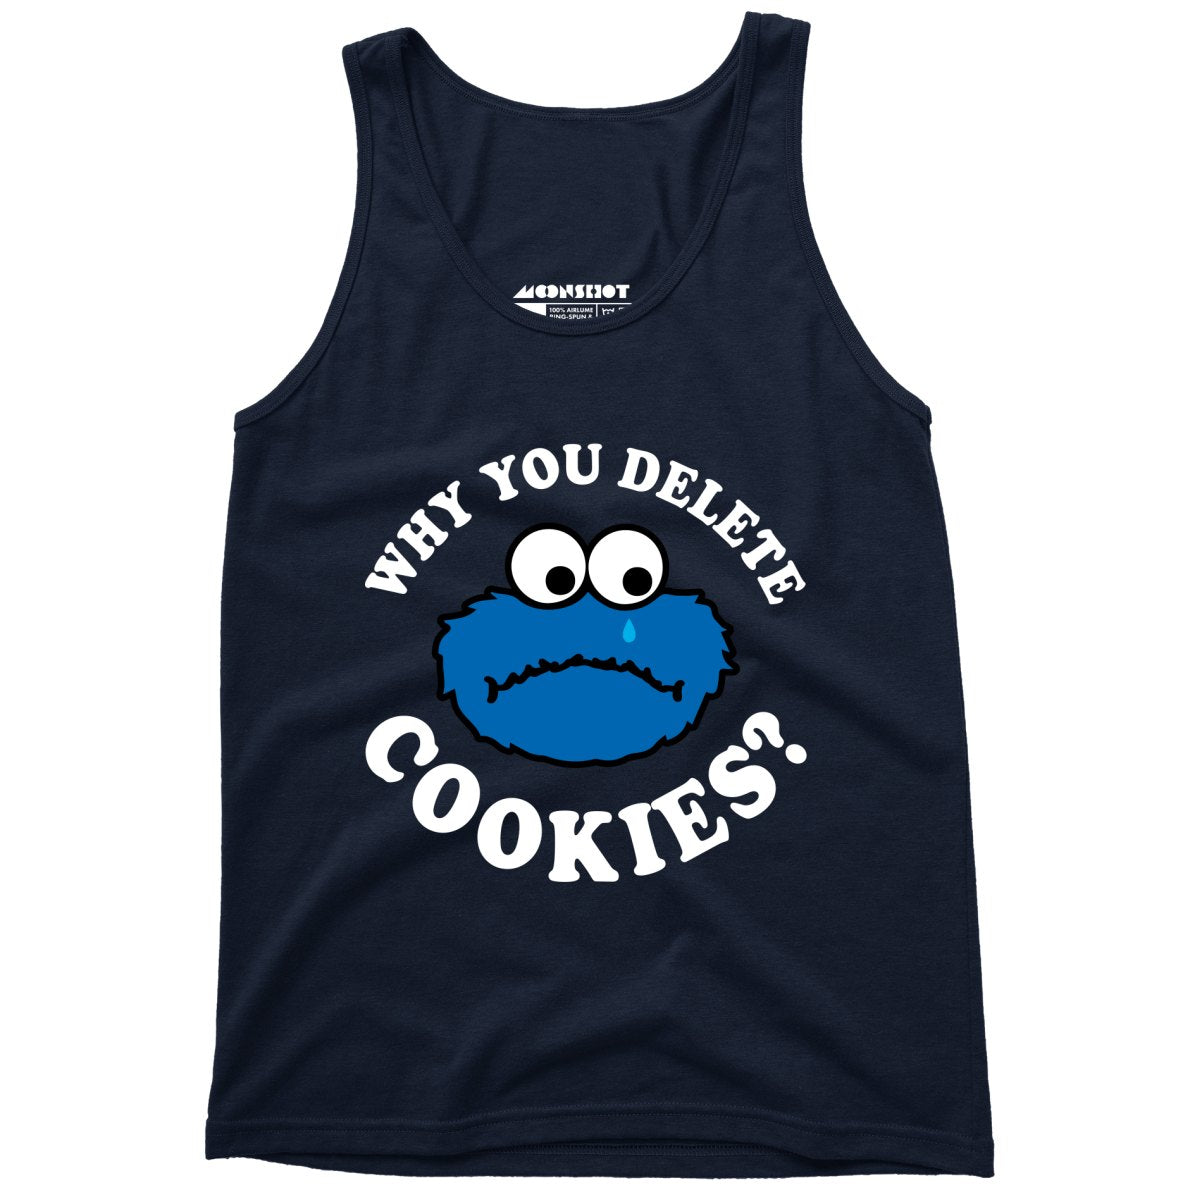 Why You Delete Cookies? - Unisex Tank Top